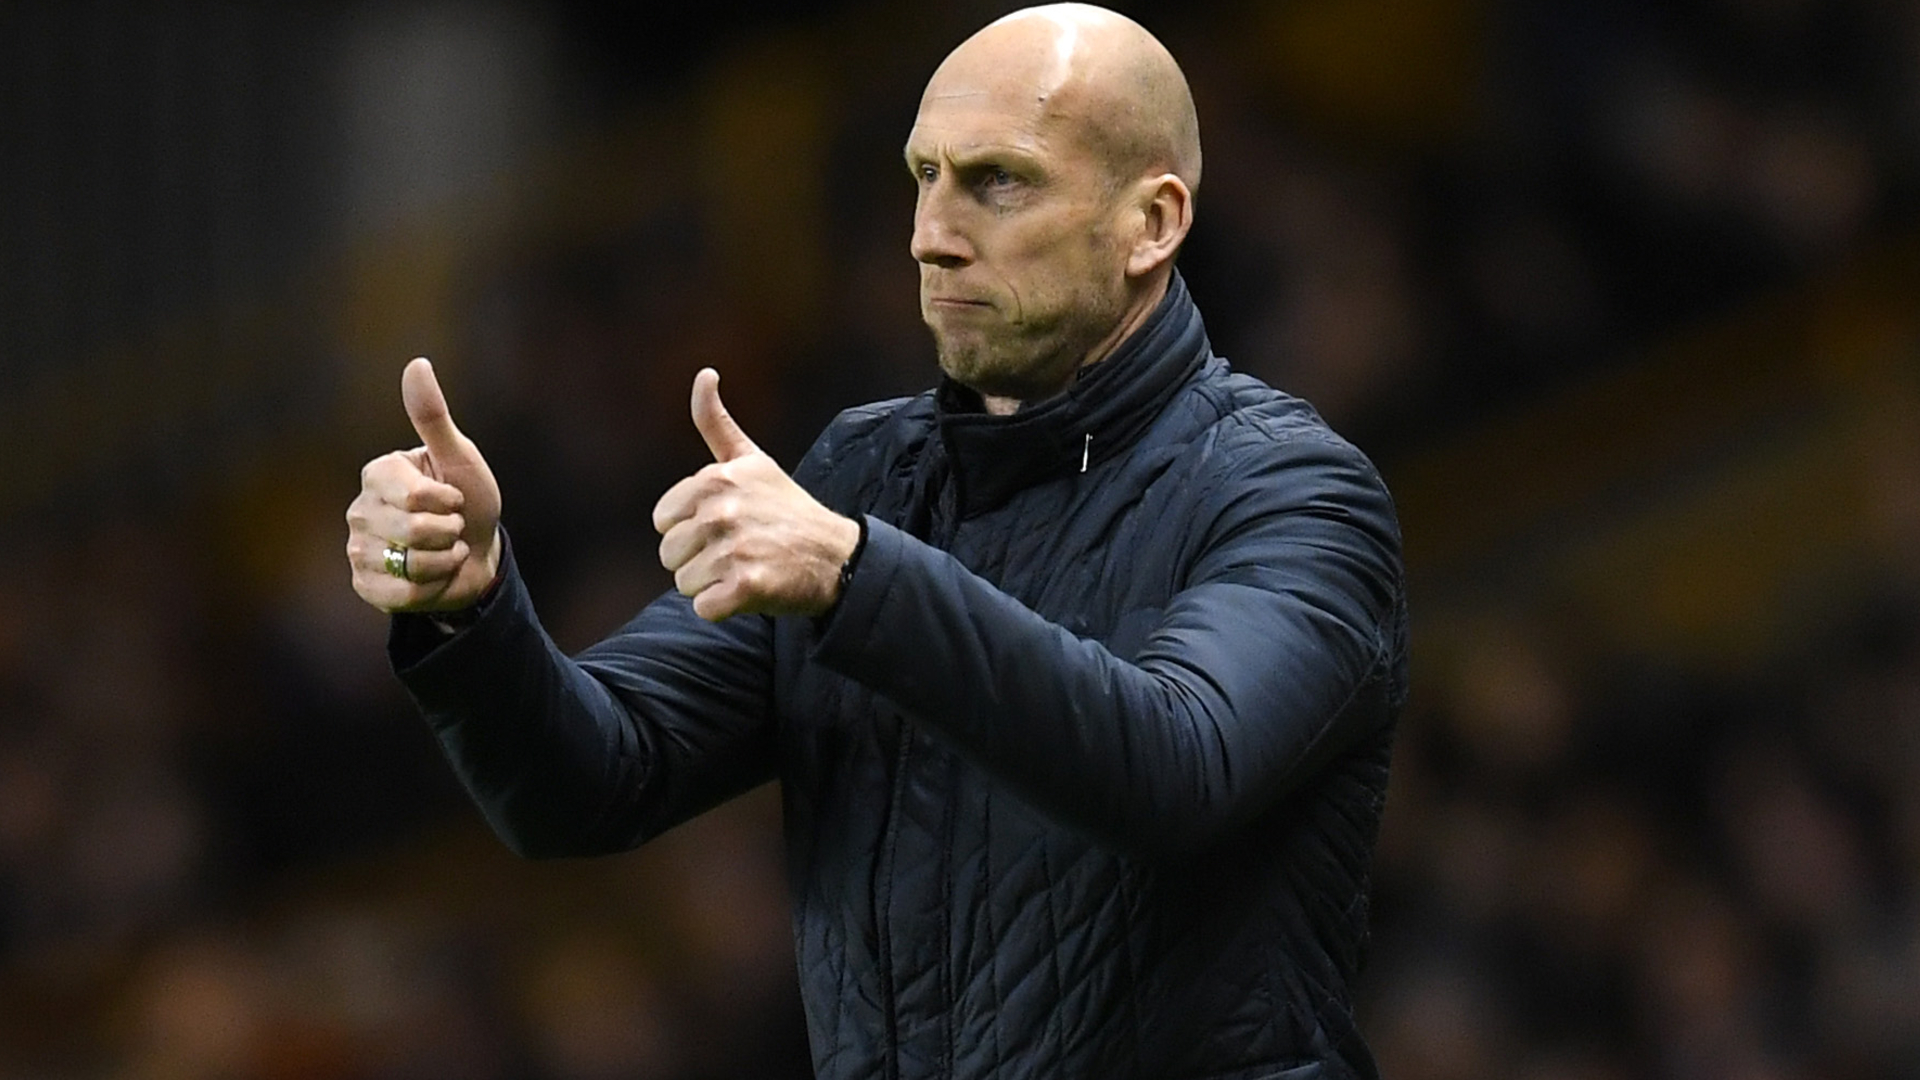 I was busy so we used a doppelganger! - Stam laughs off FC Cincinnati photo blunder